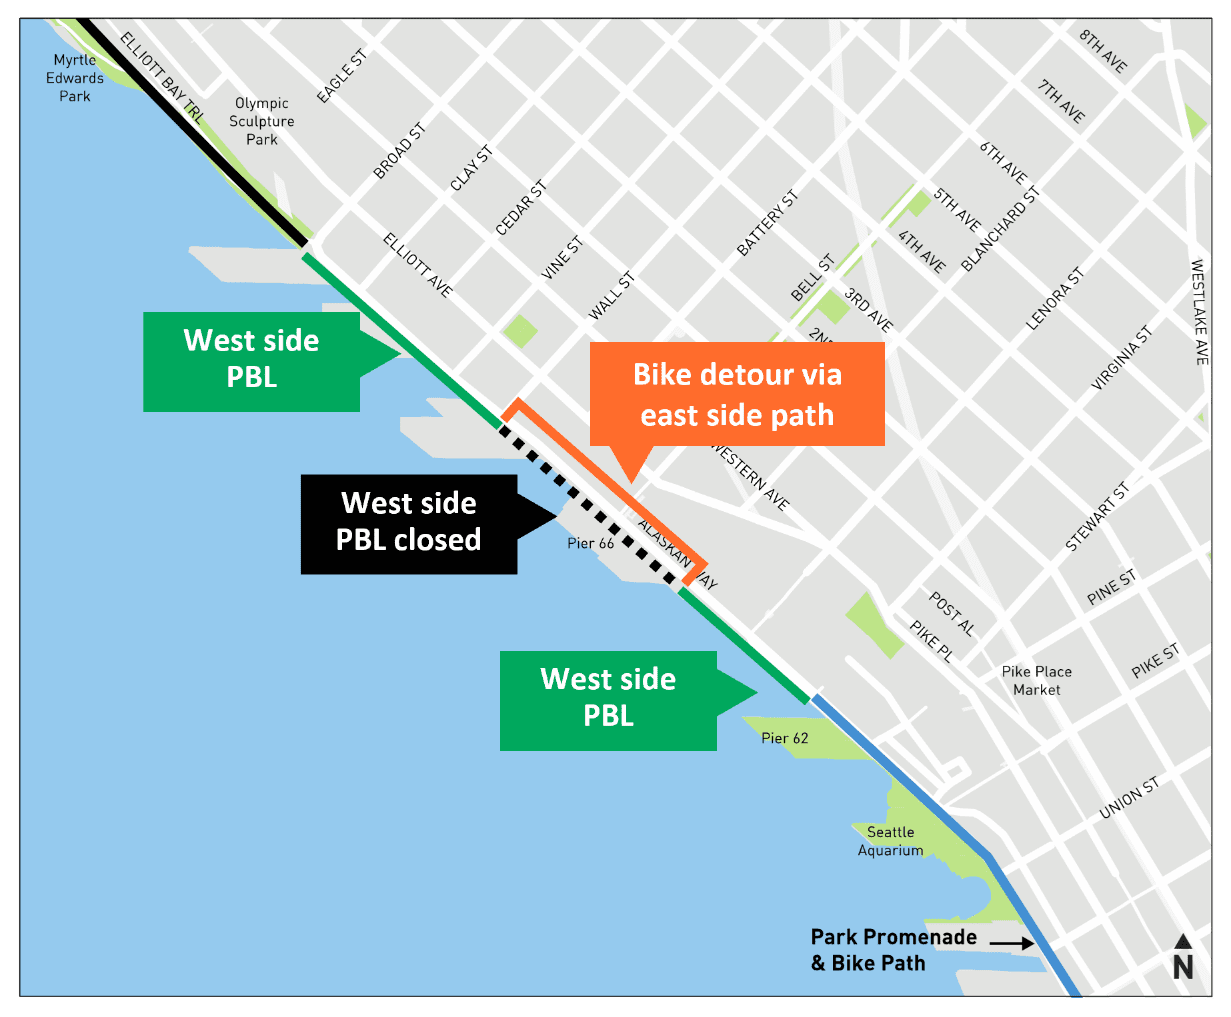 A map showing the portion of the west side protected bike lane that will close and shift on sailing days. The closure area is a black dotted line with the east side bike detour in orange.